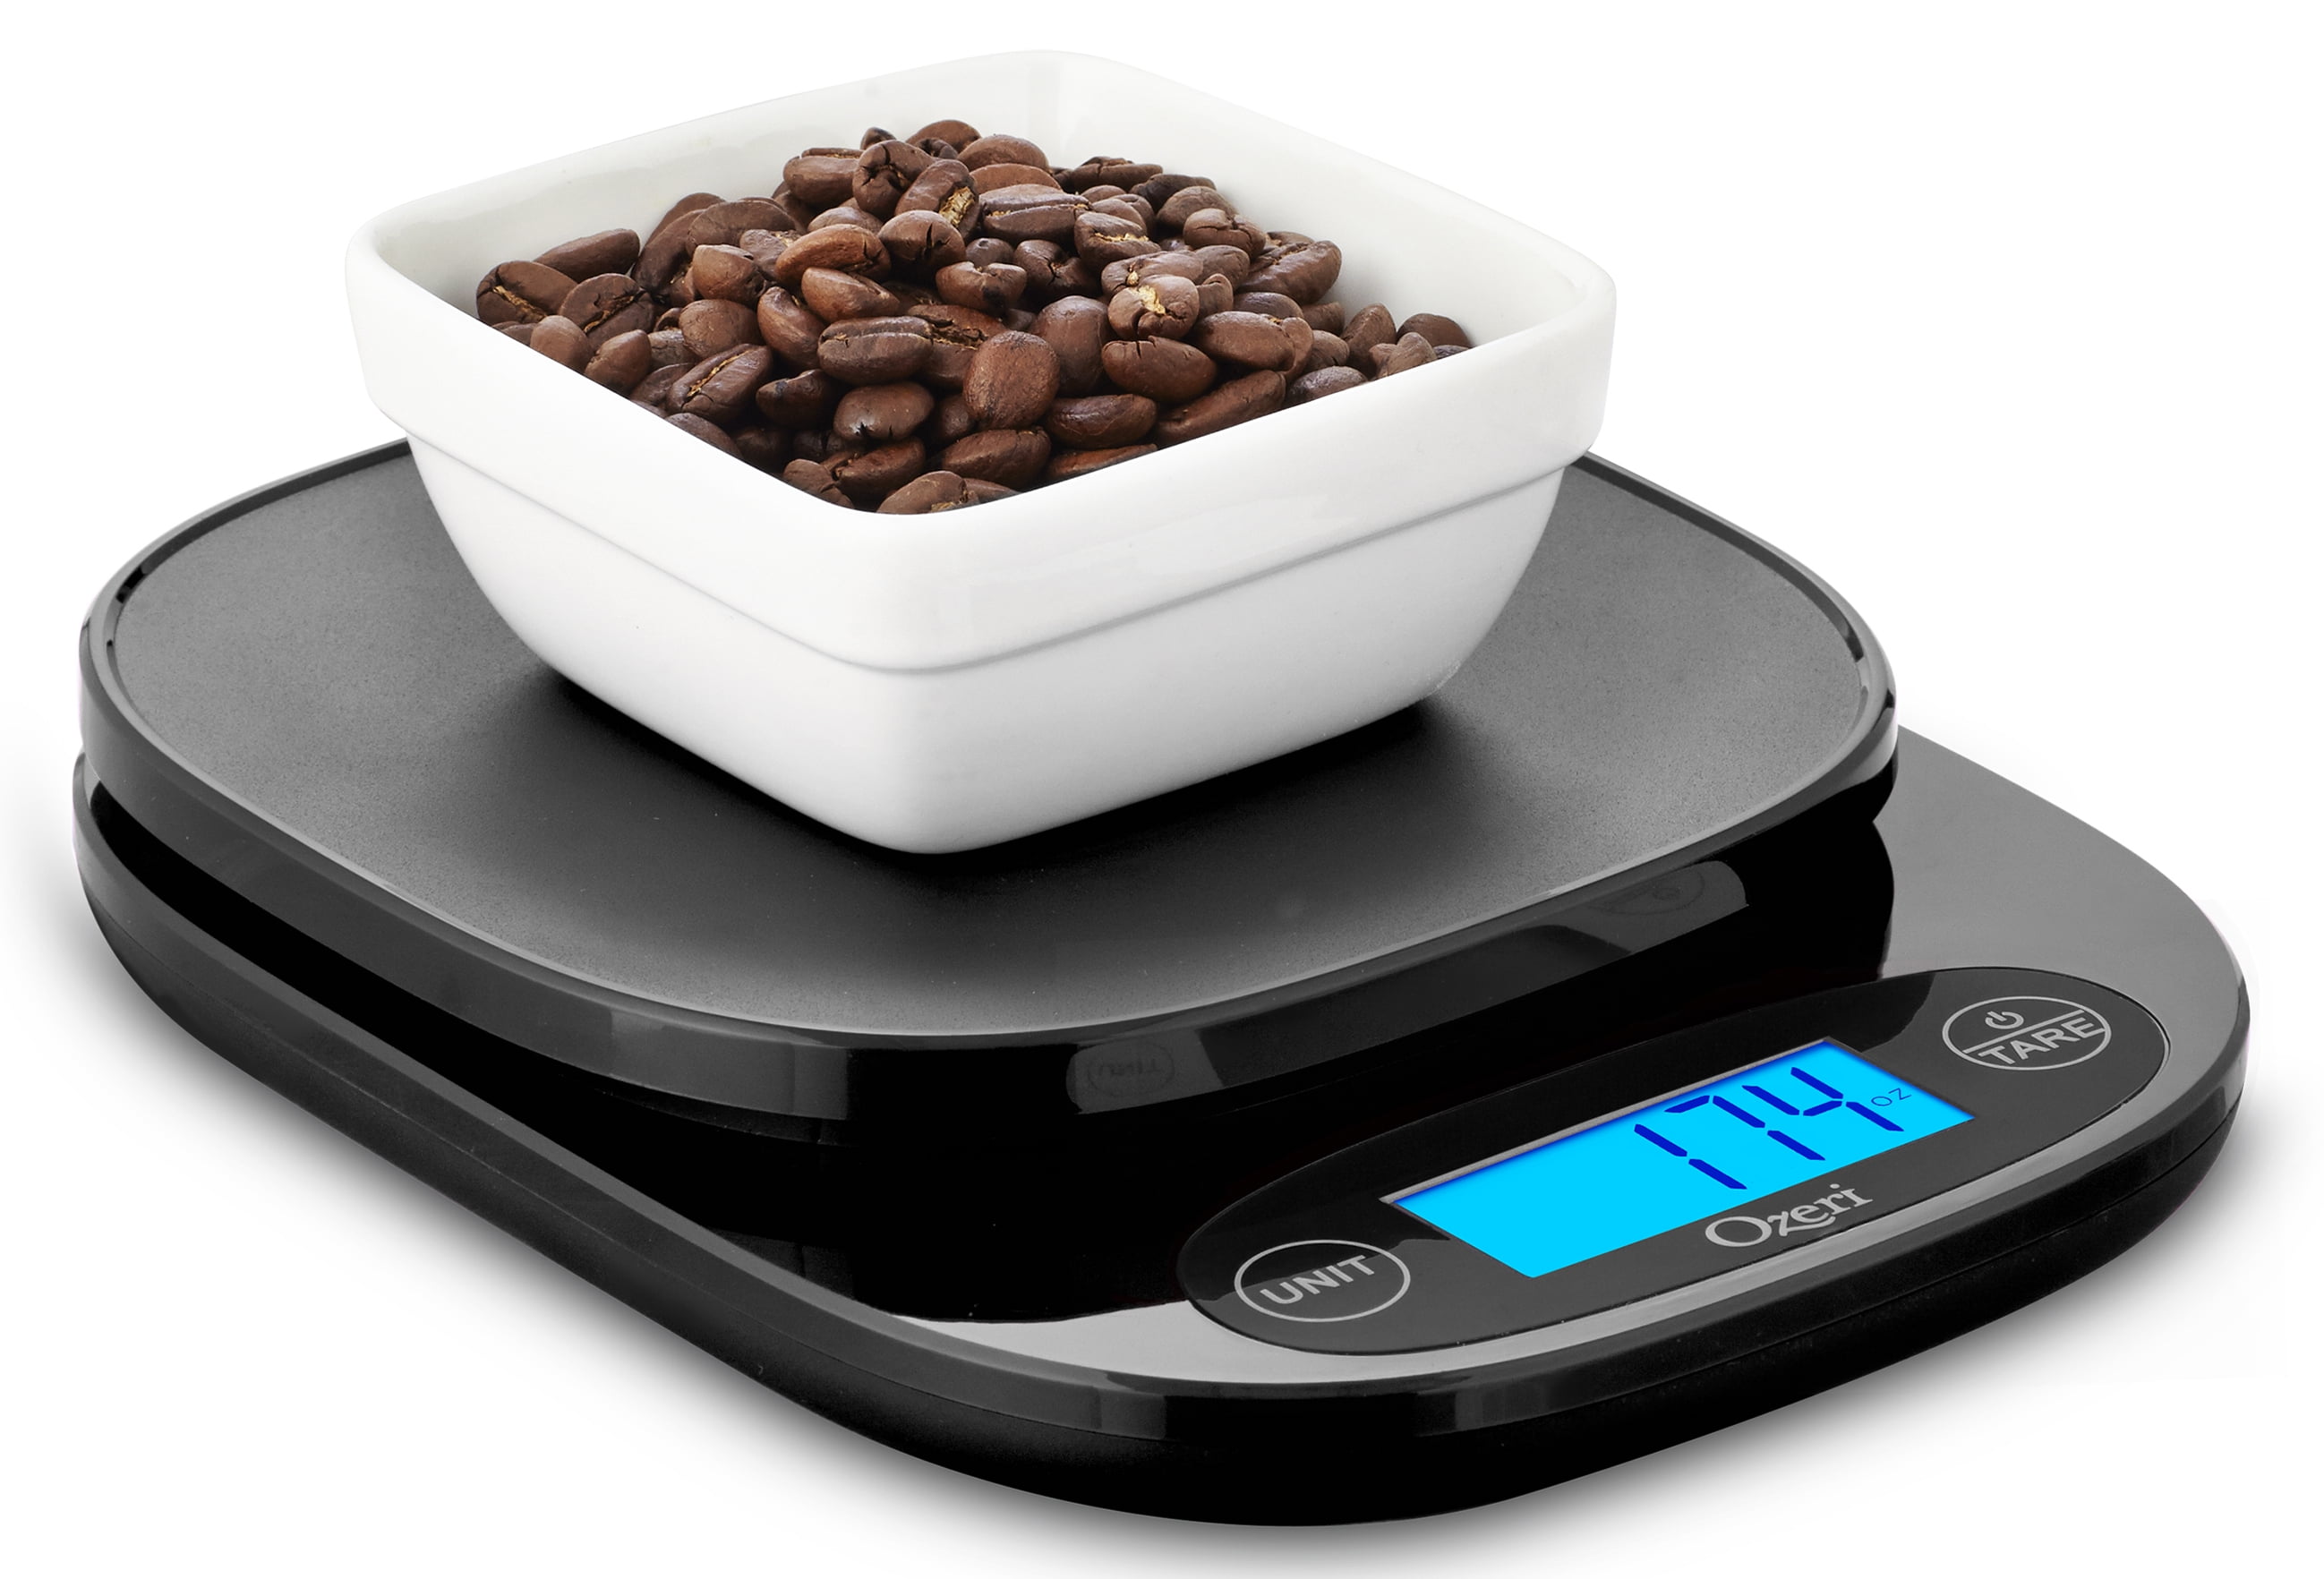 Ozeri Zk24 Garden And Kitchen Scale With 0 5 G 0 01 Oz Precision Weighing Technology Walmart Com